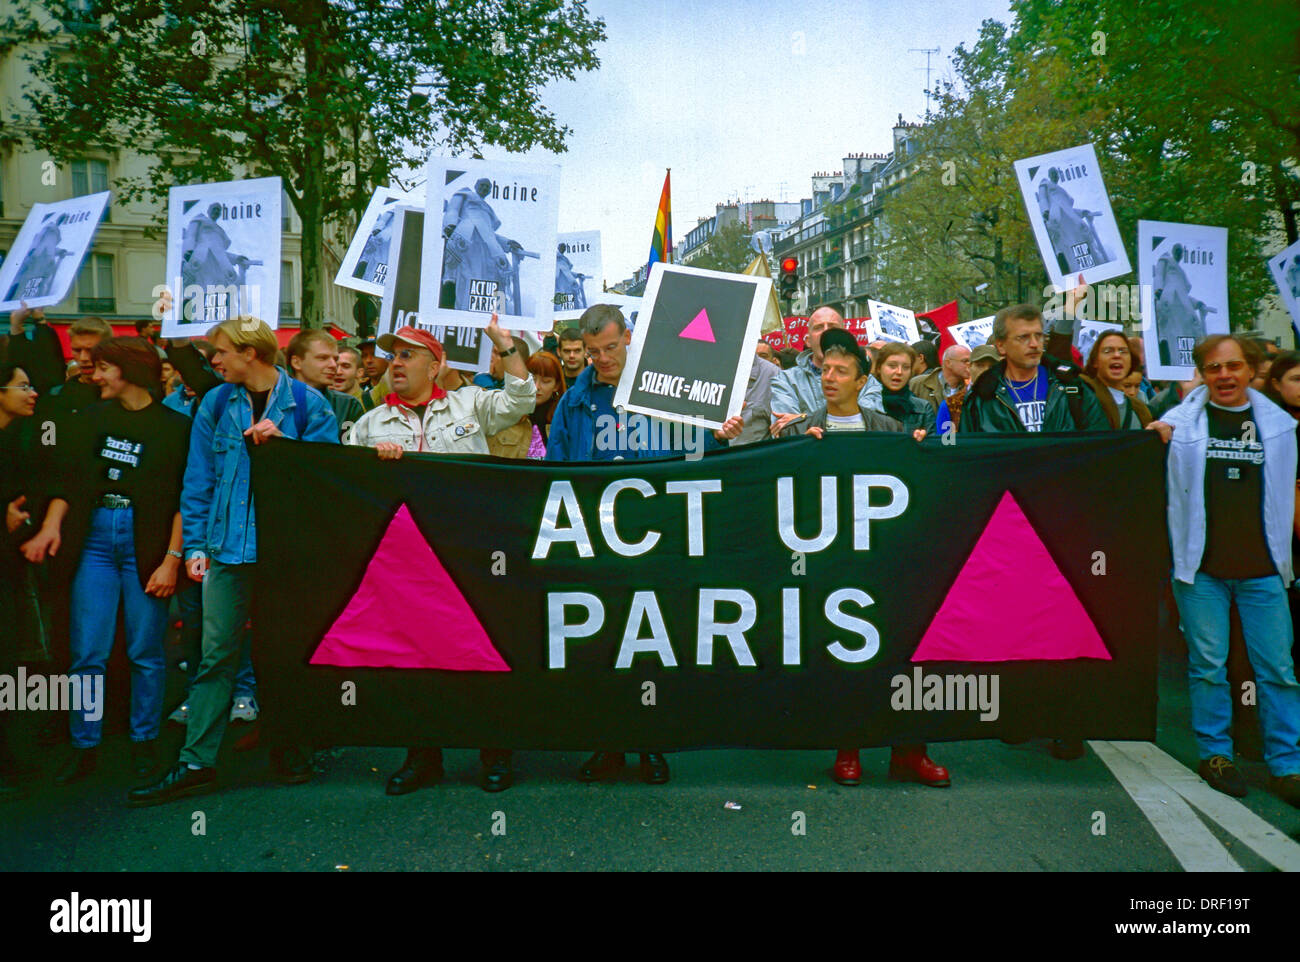 Paris, France, Gay AIDS Militants of ACT UP Demonstrators protesting with other groups at Demonstration Against Pope Visit to City, act up protest silence death, aids 1990s Stock Photo